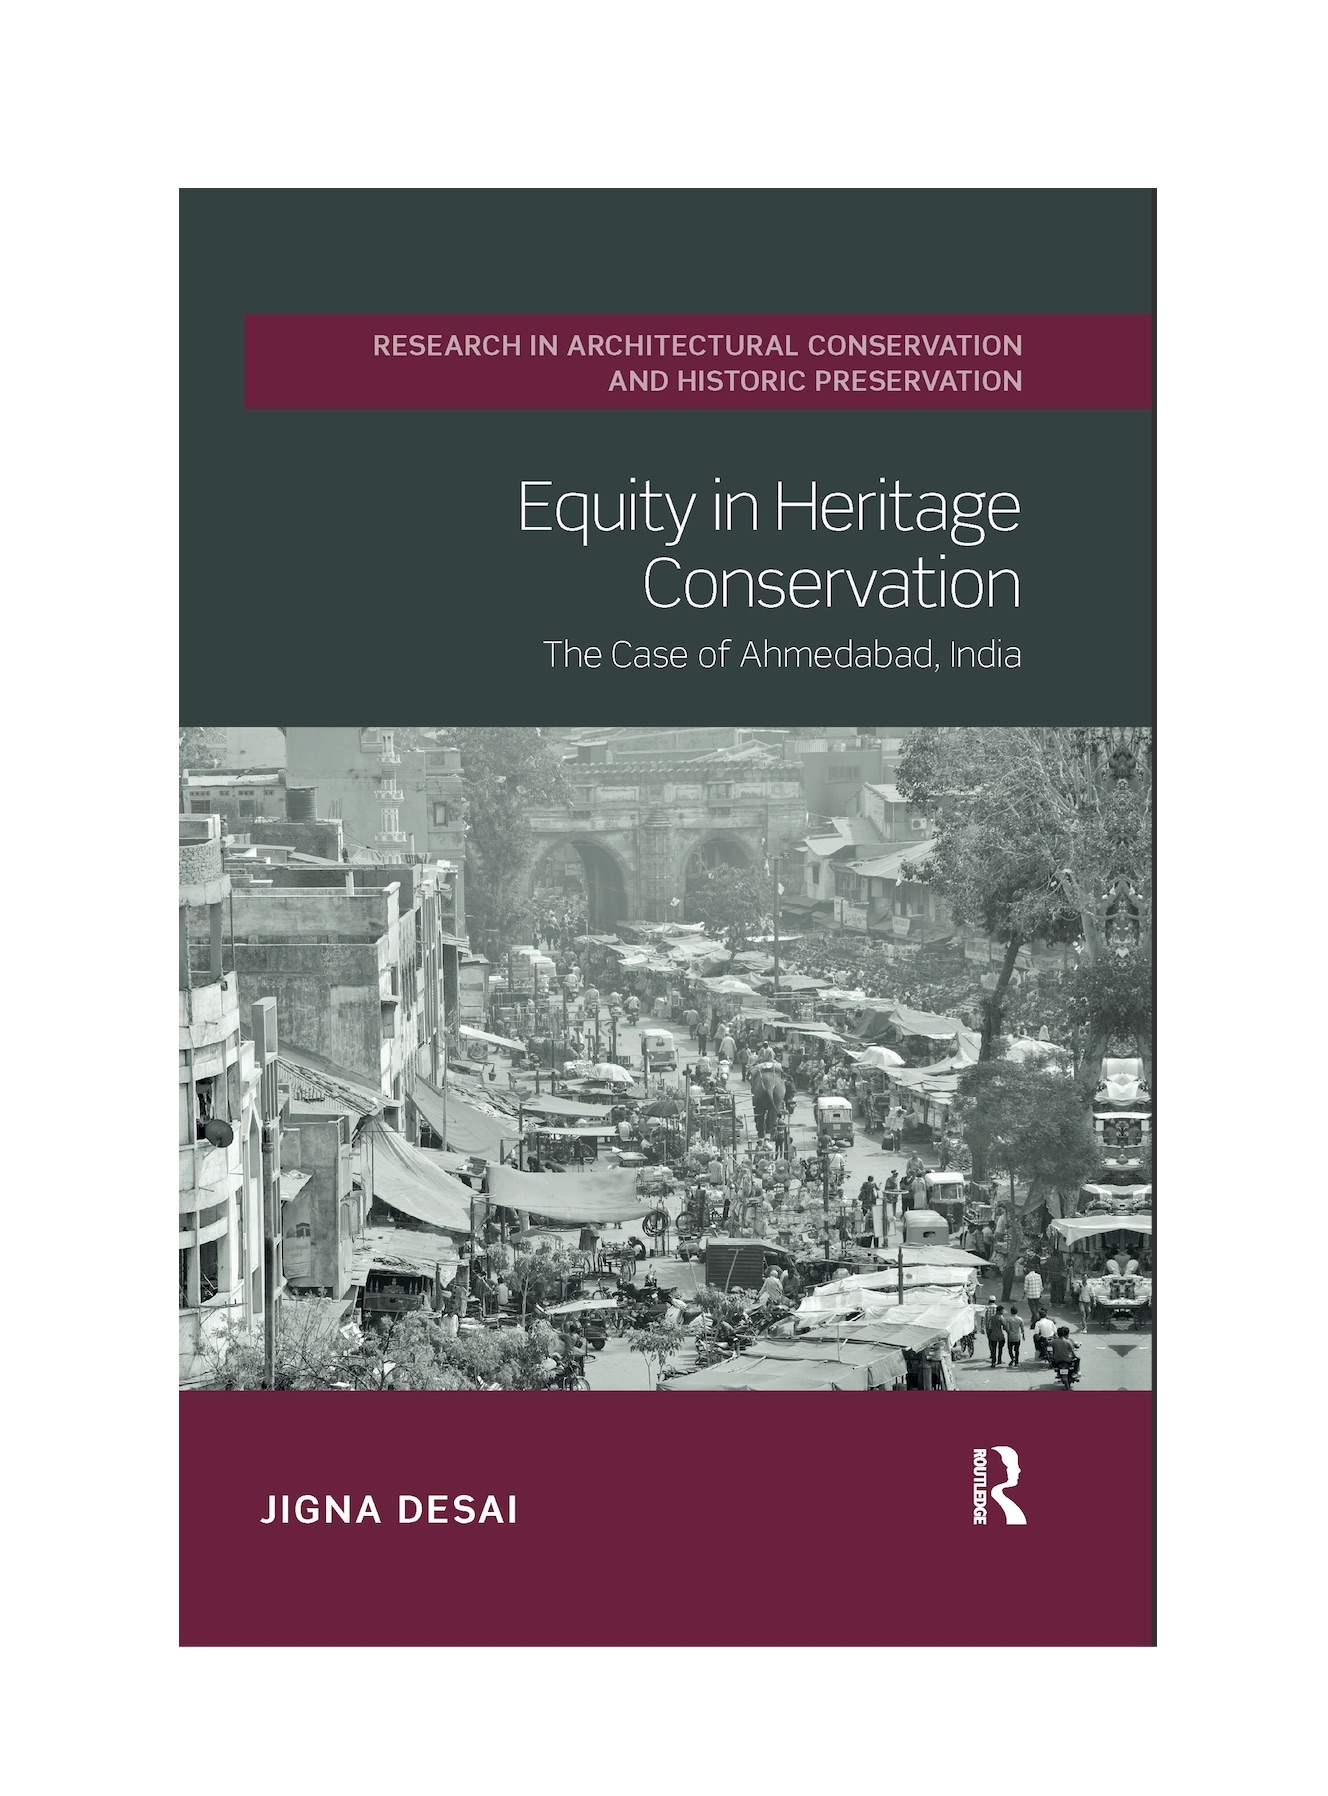 Equity in Heritage Conservation, the case of Ahmedabad, India